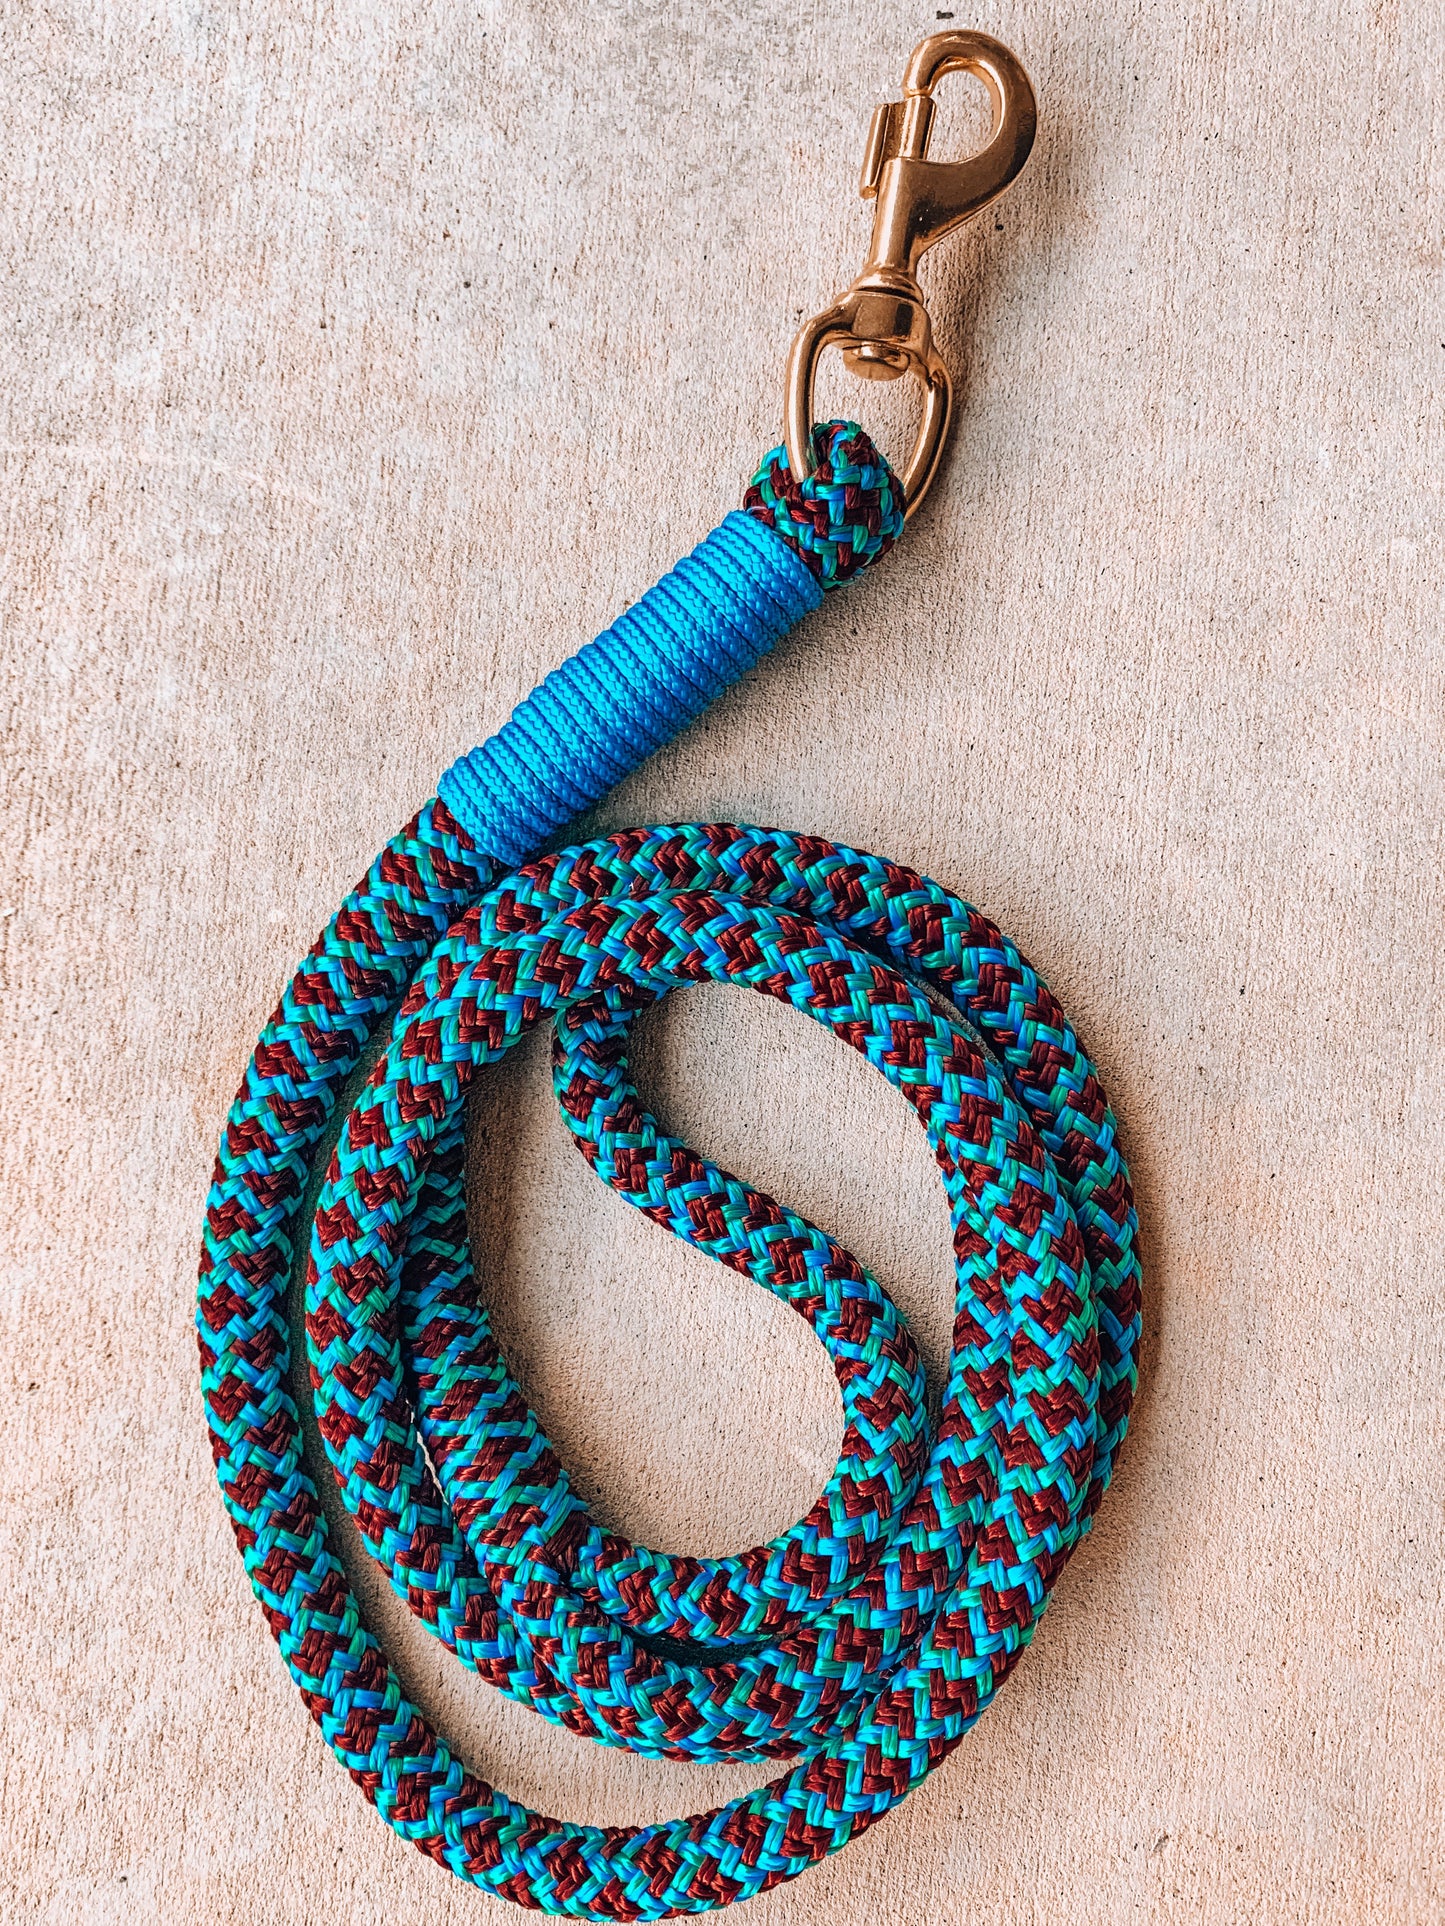 Deluxe Dog Lead - "Peacock" freeshipping - Wild Rider